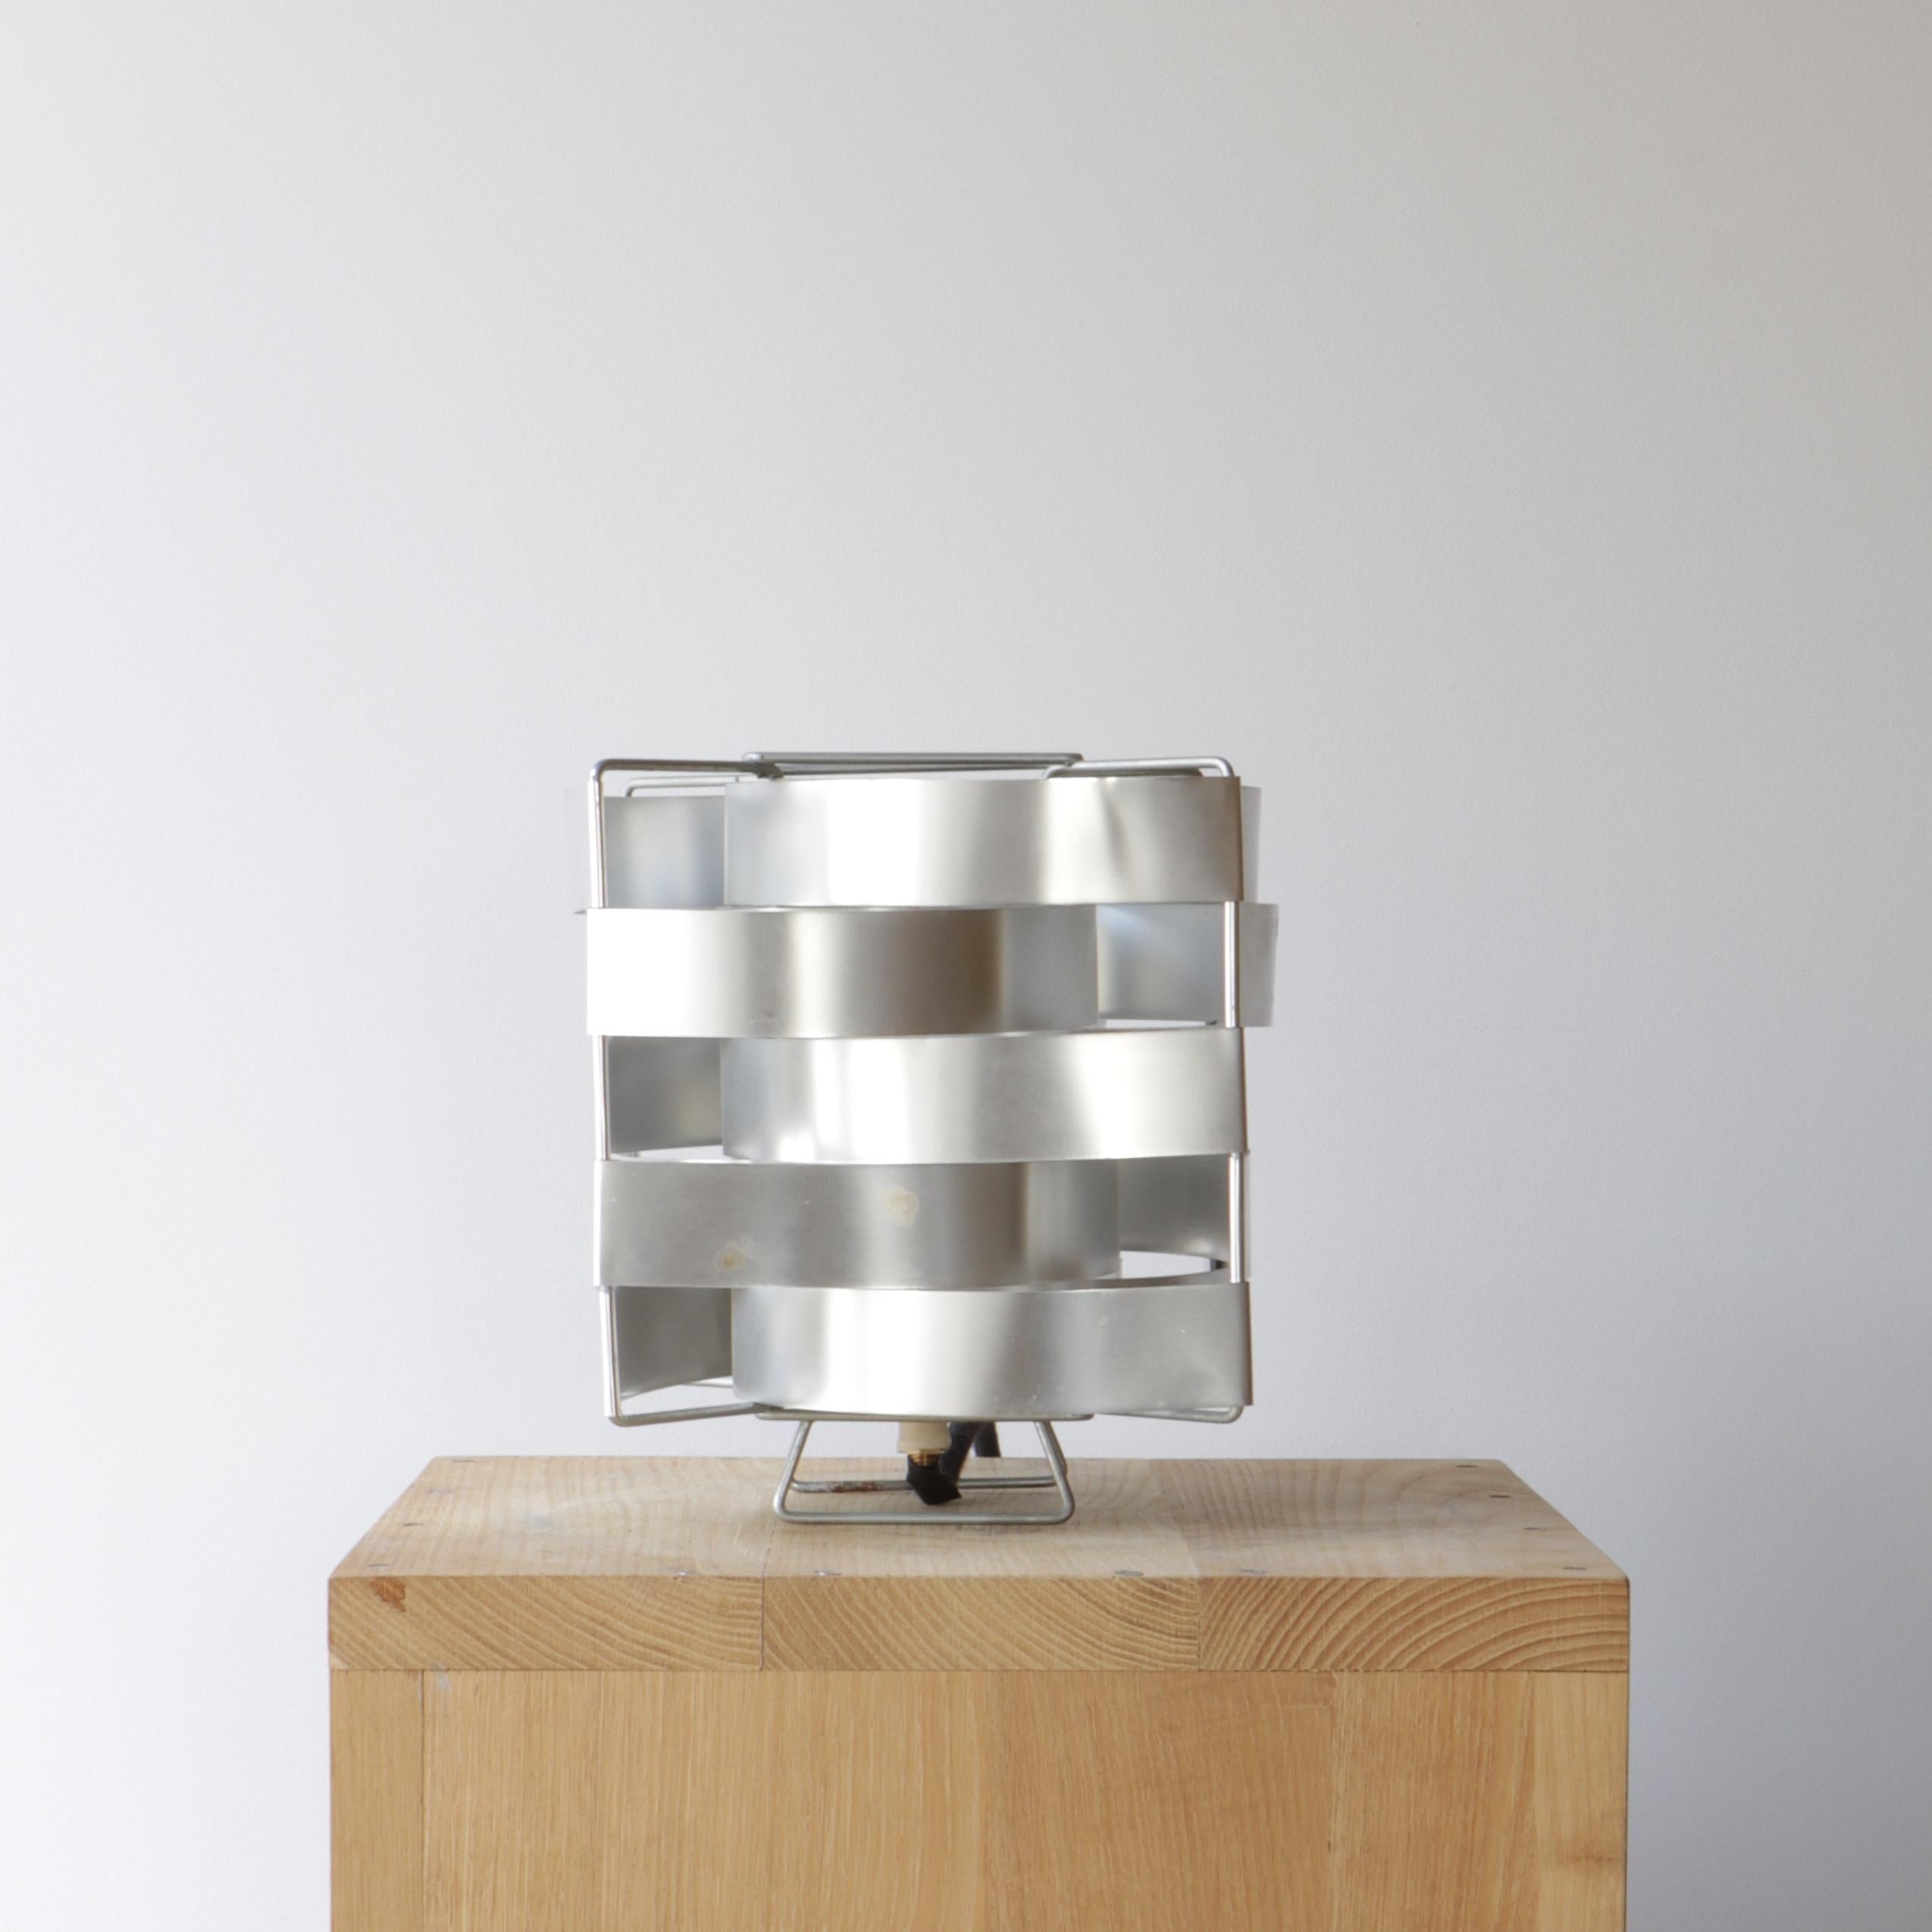 This table lamp by Max Sauze is called 